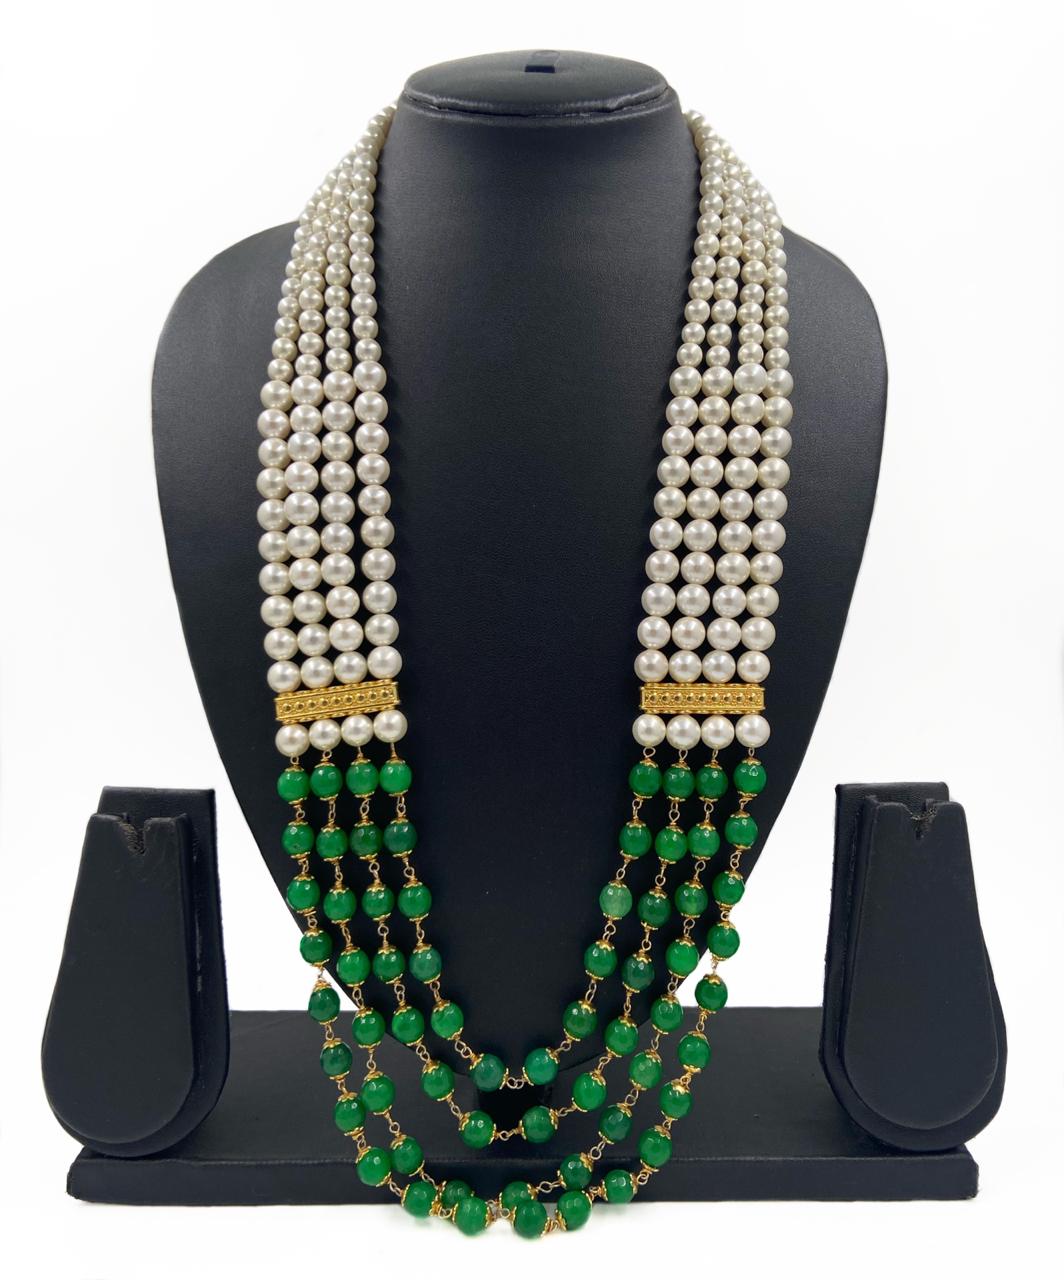 Semi Precious Green Jade And Pearls Multilayered Grooms Necklace For Men Beads Jewellery